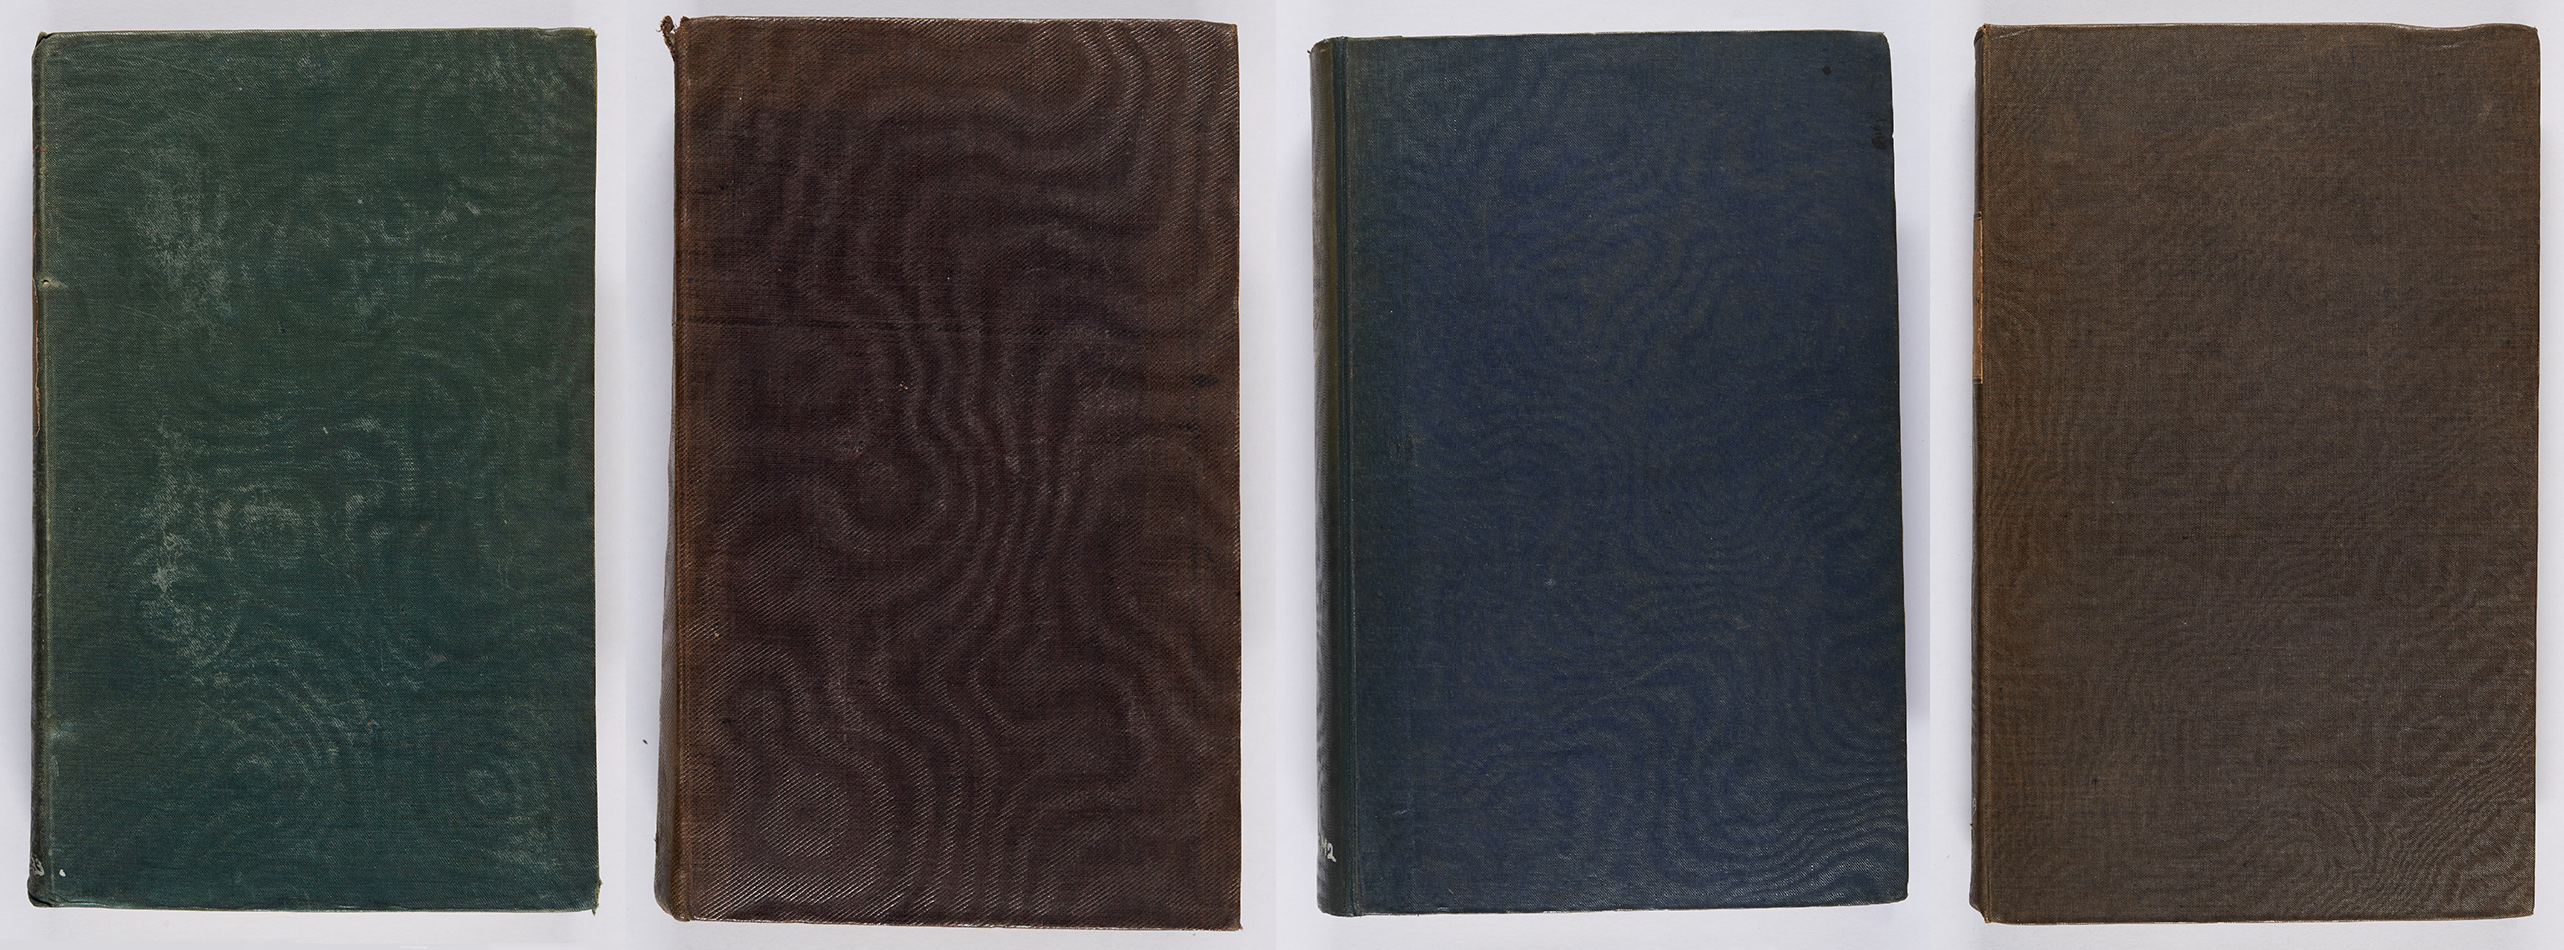 Some examples of bindings with a moiré rib, in a variety of coloured cloths. Henry Ellis, A general introduction to Domesday book, 2 vol. (London: printed by command of His Majesty King William IV under the direction of the Commissioners of the Public records of the Kingdom, 1833) s DA190.E5E33 ; Thomas Wemyss, A key to the symbolical language of Scripture (Edinburgh, T. Clark, 1835), s BS477.W3 ; George Montagu, Horae Hebraicae (London: James Nisbet & Co, 1835), s BS2775.M2 ; Francis Hutton, A series of discourses on Christ's temptation in the wilderness (London: Bowdery and Kerby, 1833),  s BT355.H9.